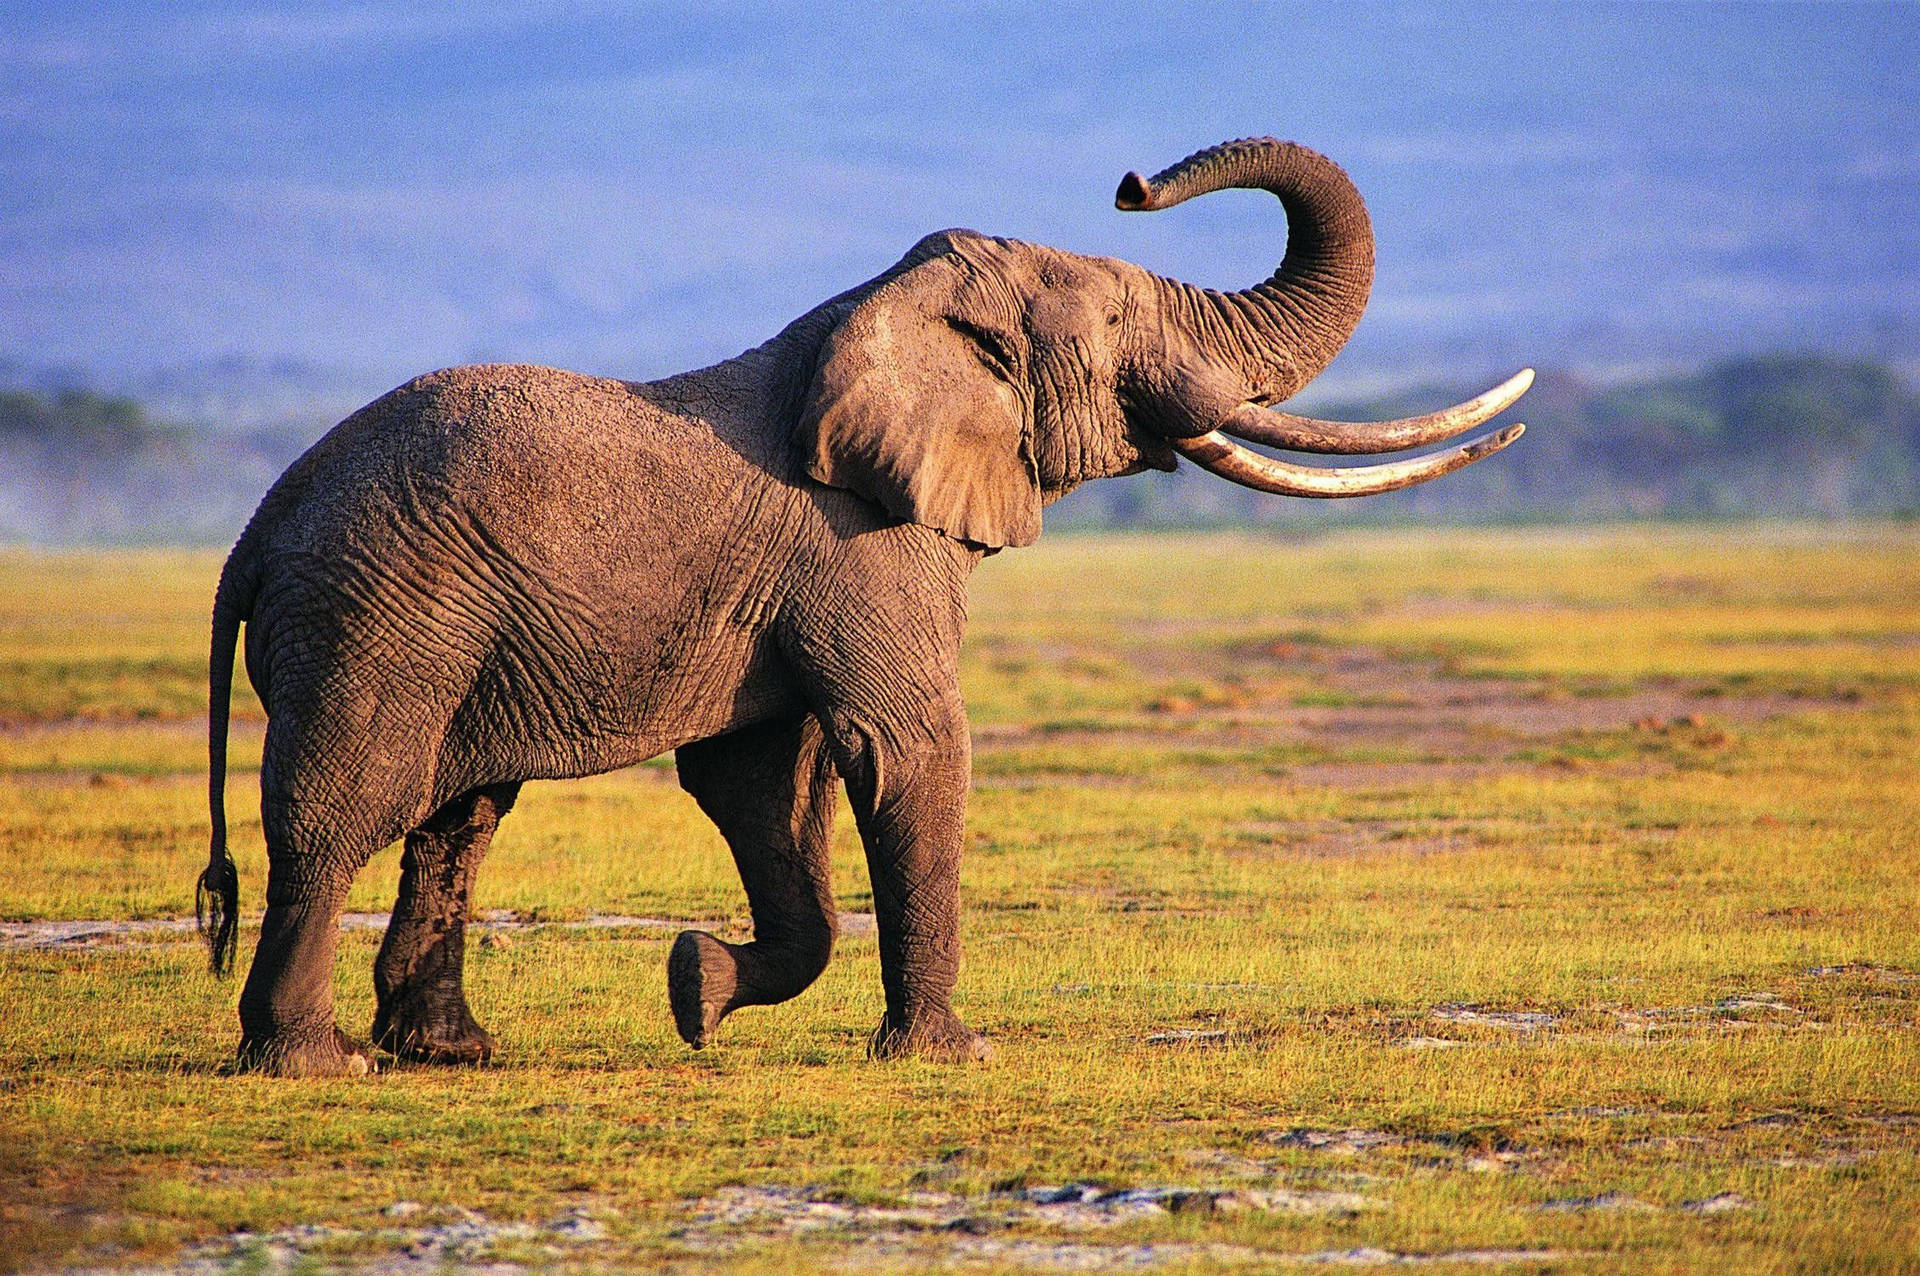 Free Elephant Wallpaper Downloads, [300+] Elephant Wallpapers for FREE |  